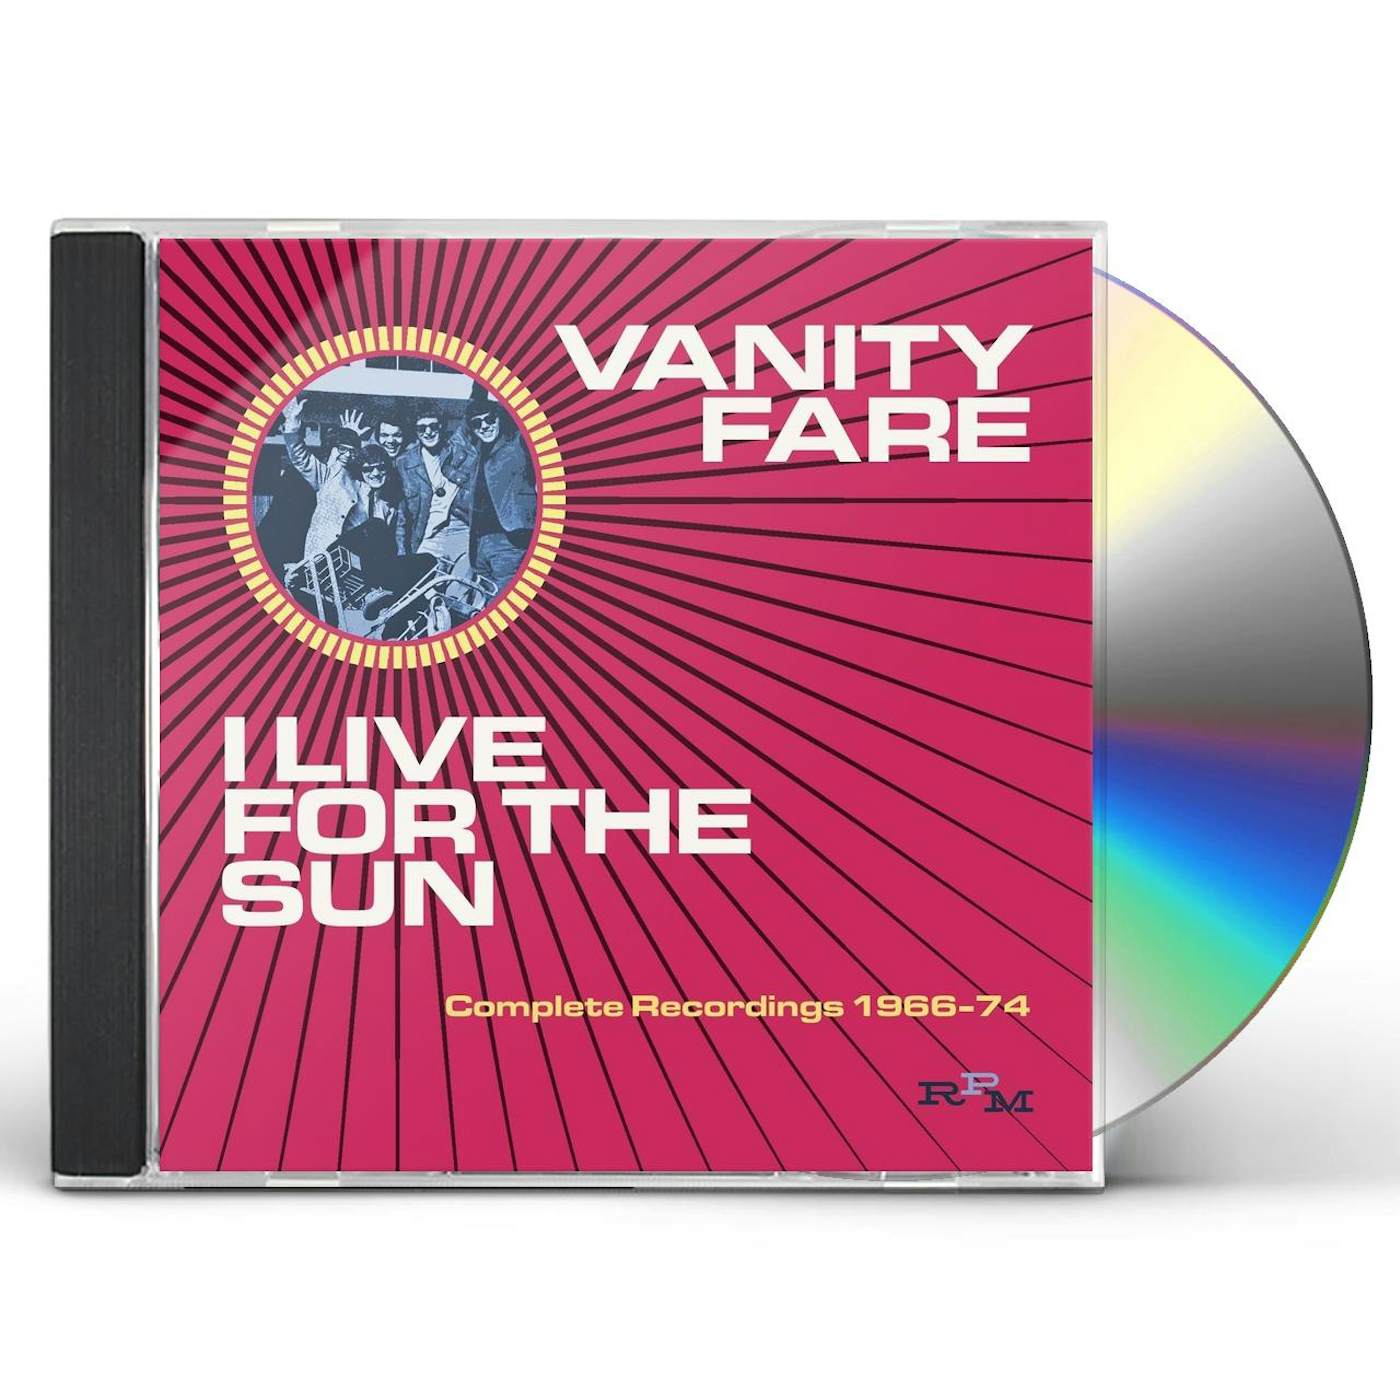 Vanity Fare I LIVE FOR THE SUN: COMPLETE RECORDINGS 1968-74 CD